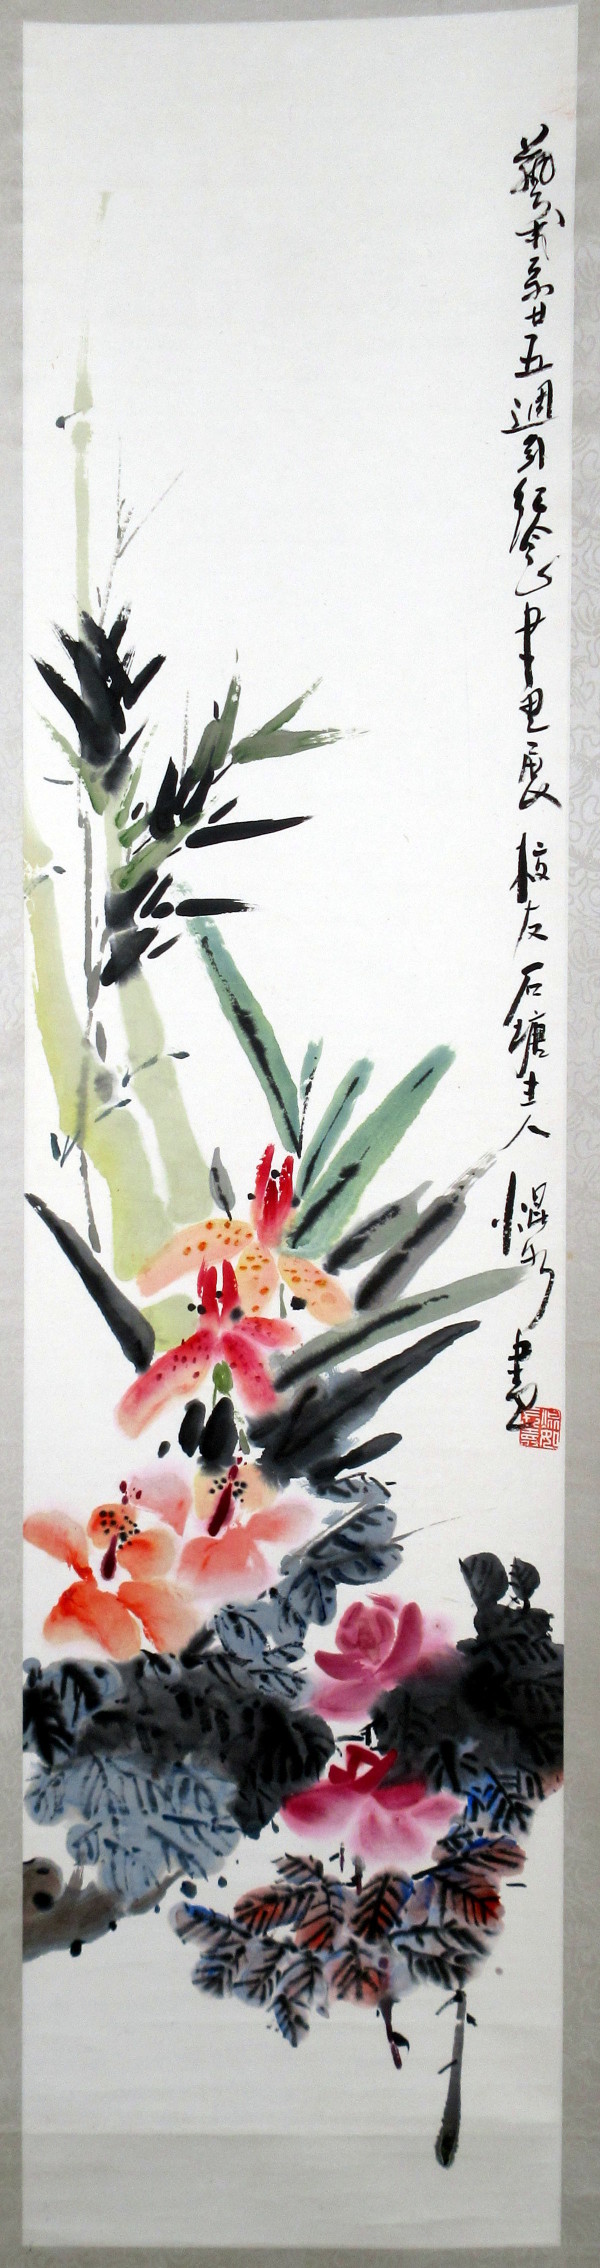 Bamboo, Irises, and Roses by Kwan Y. Jung